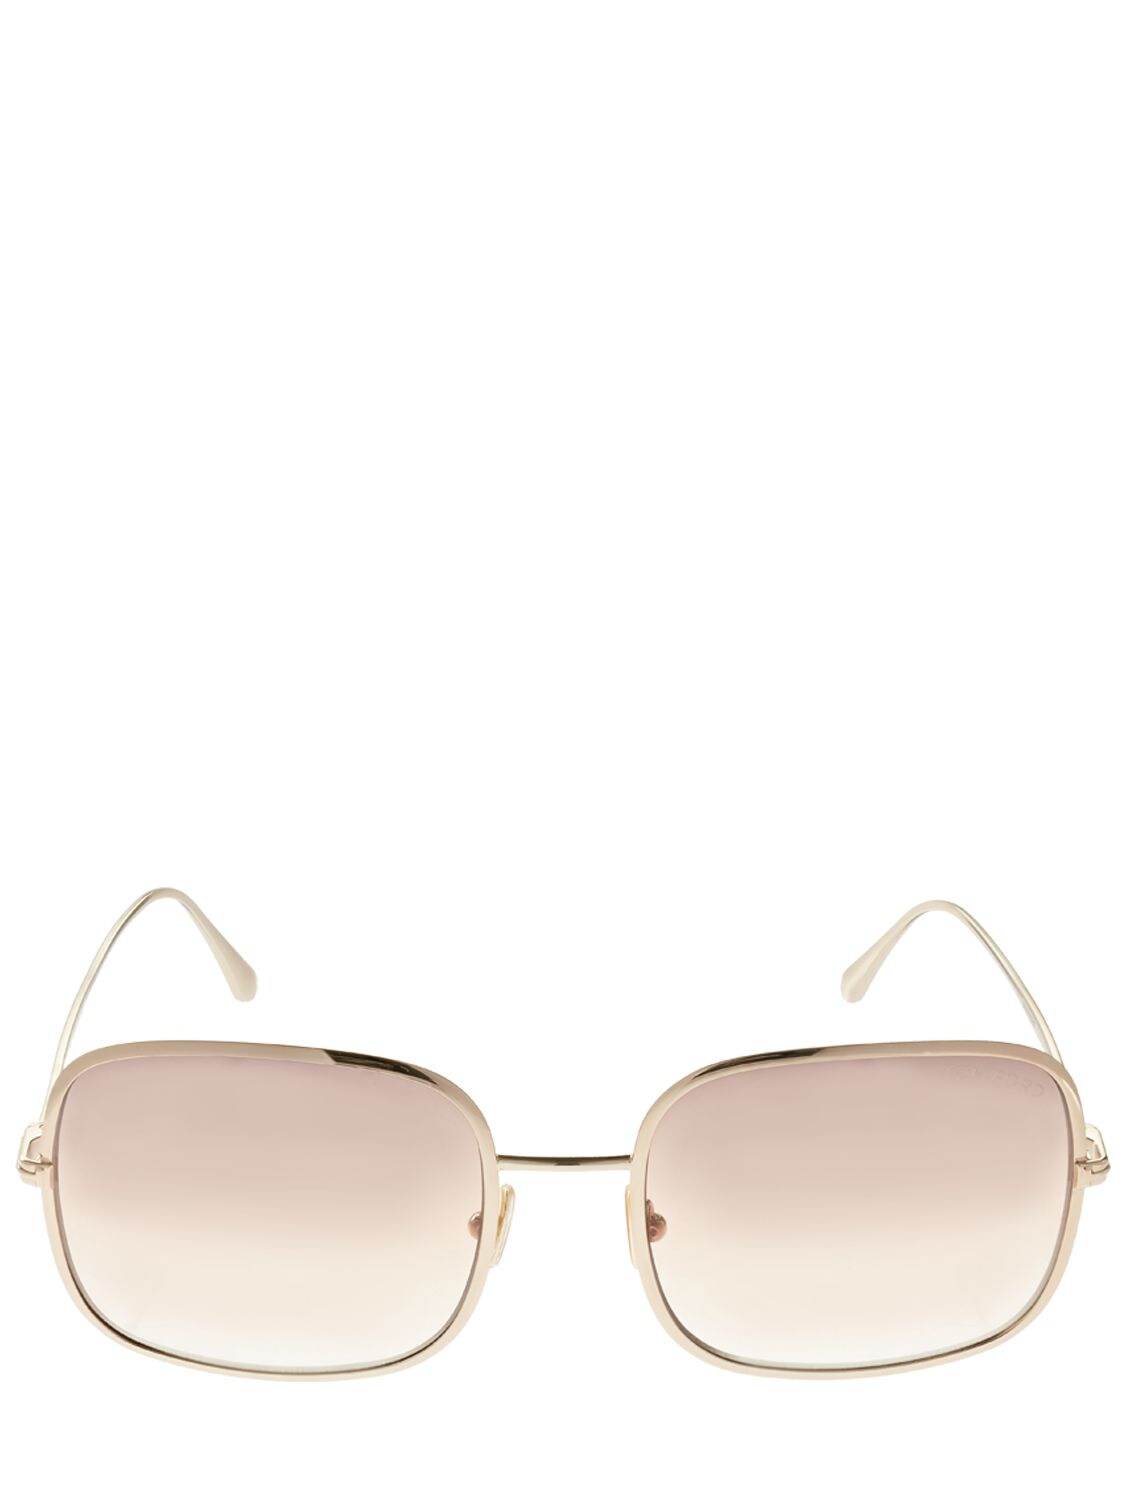 Tom Ford Keira Squared Metal Sunglasses In Gold,multi